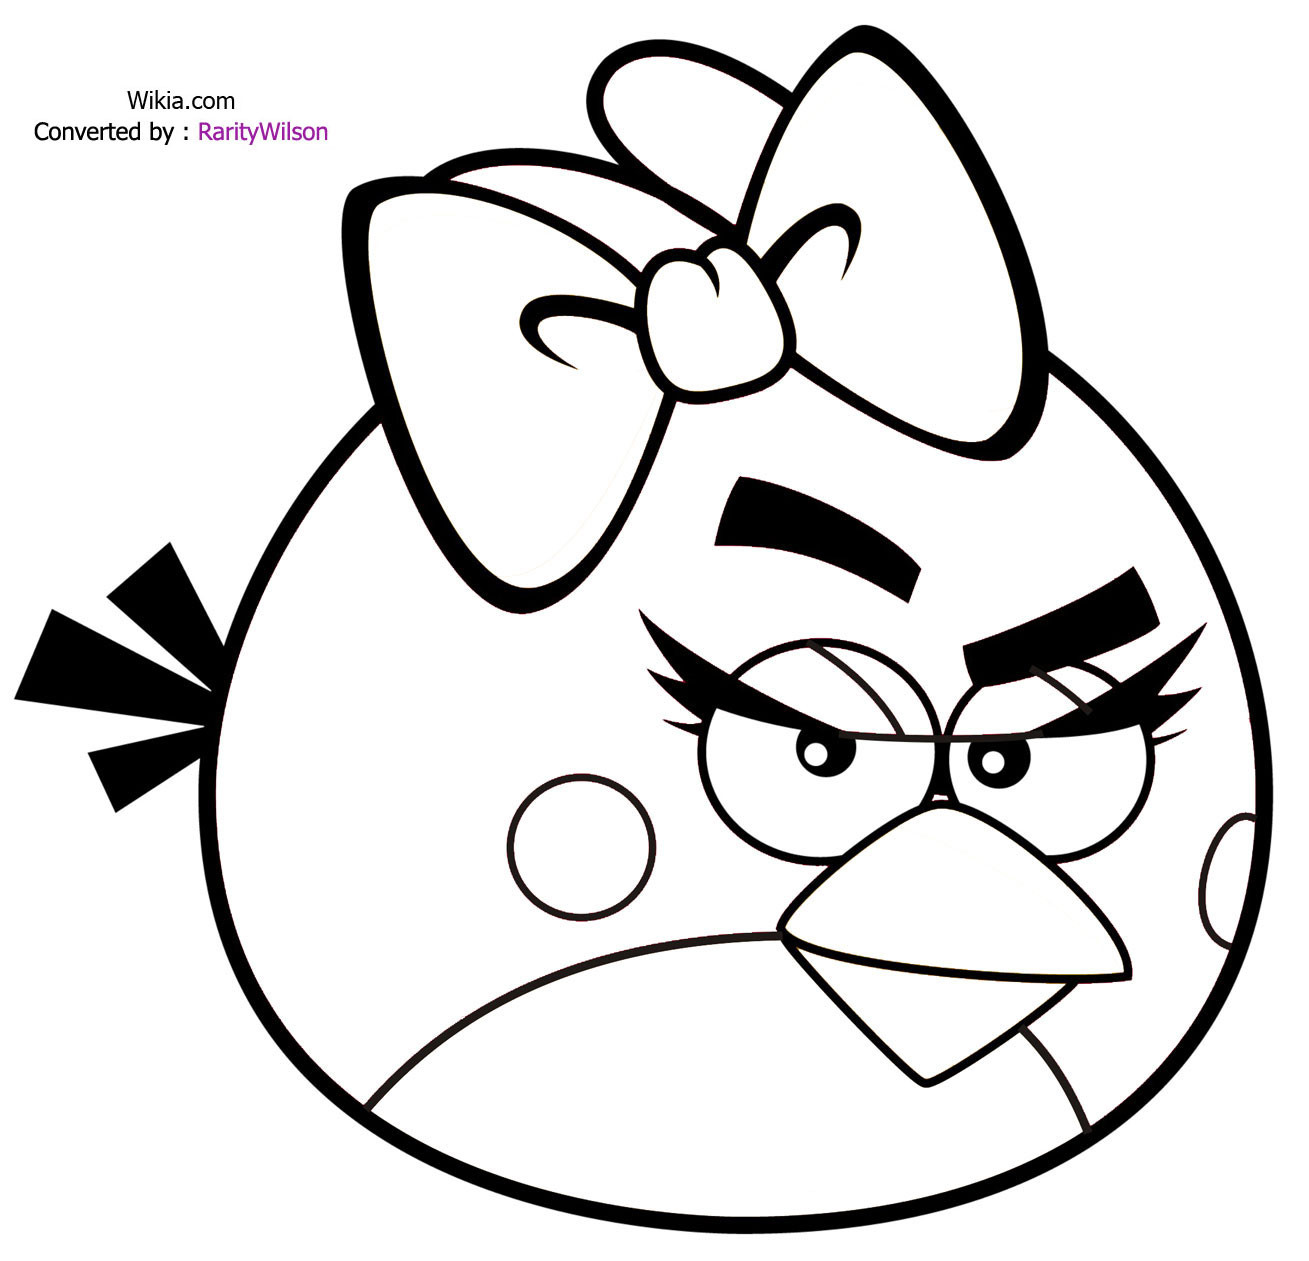 Girl Angry Birds Coloring Pages
 Angry Birds Character Coloring Pages